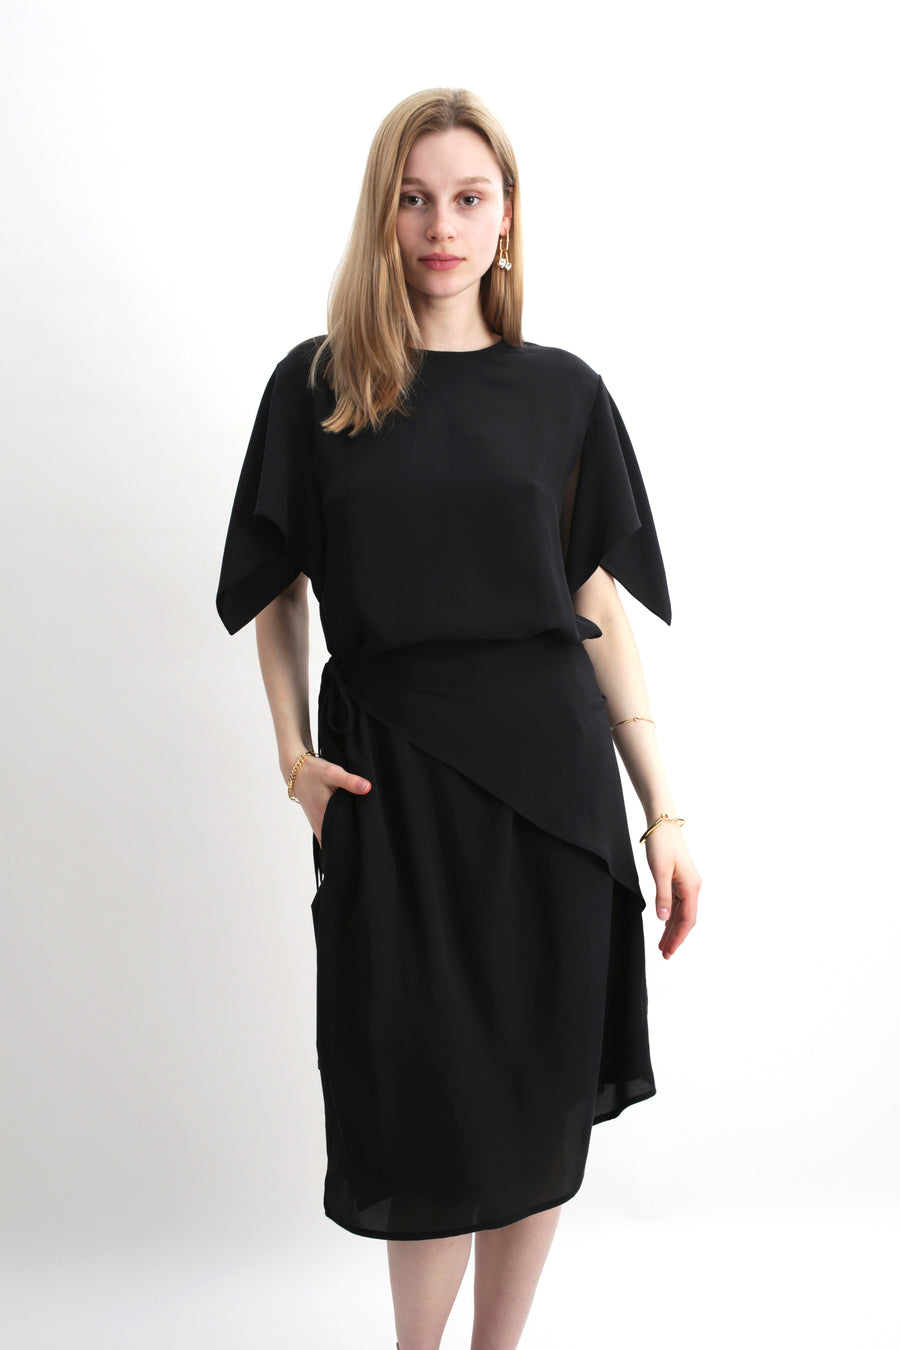 Dress Duvall, simply black - limited edition